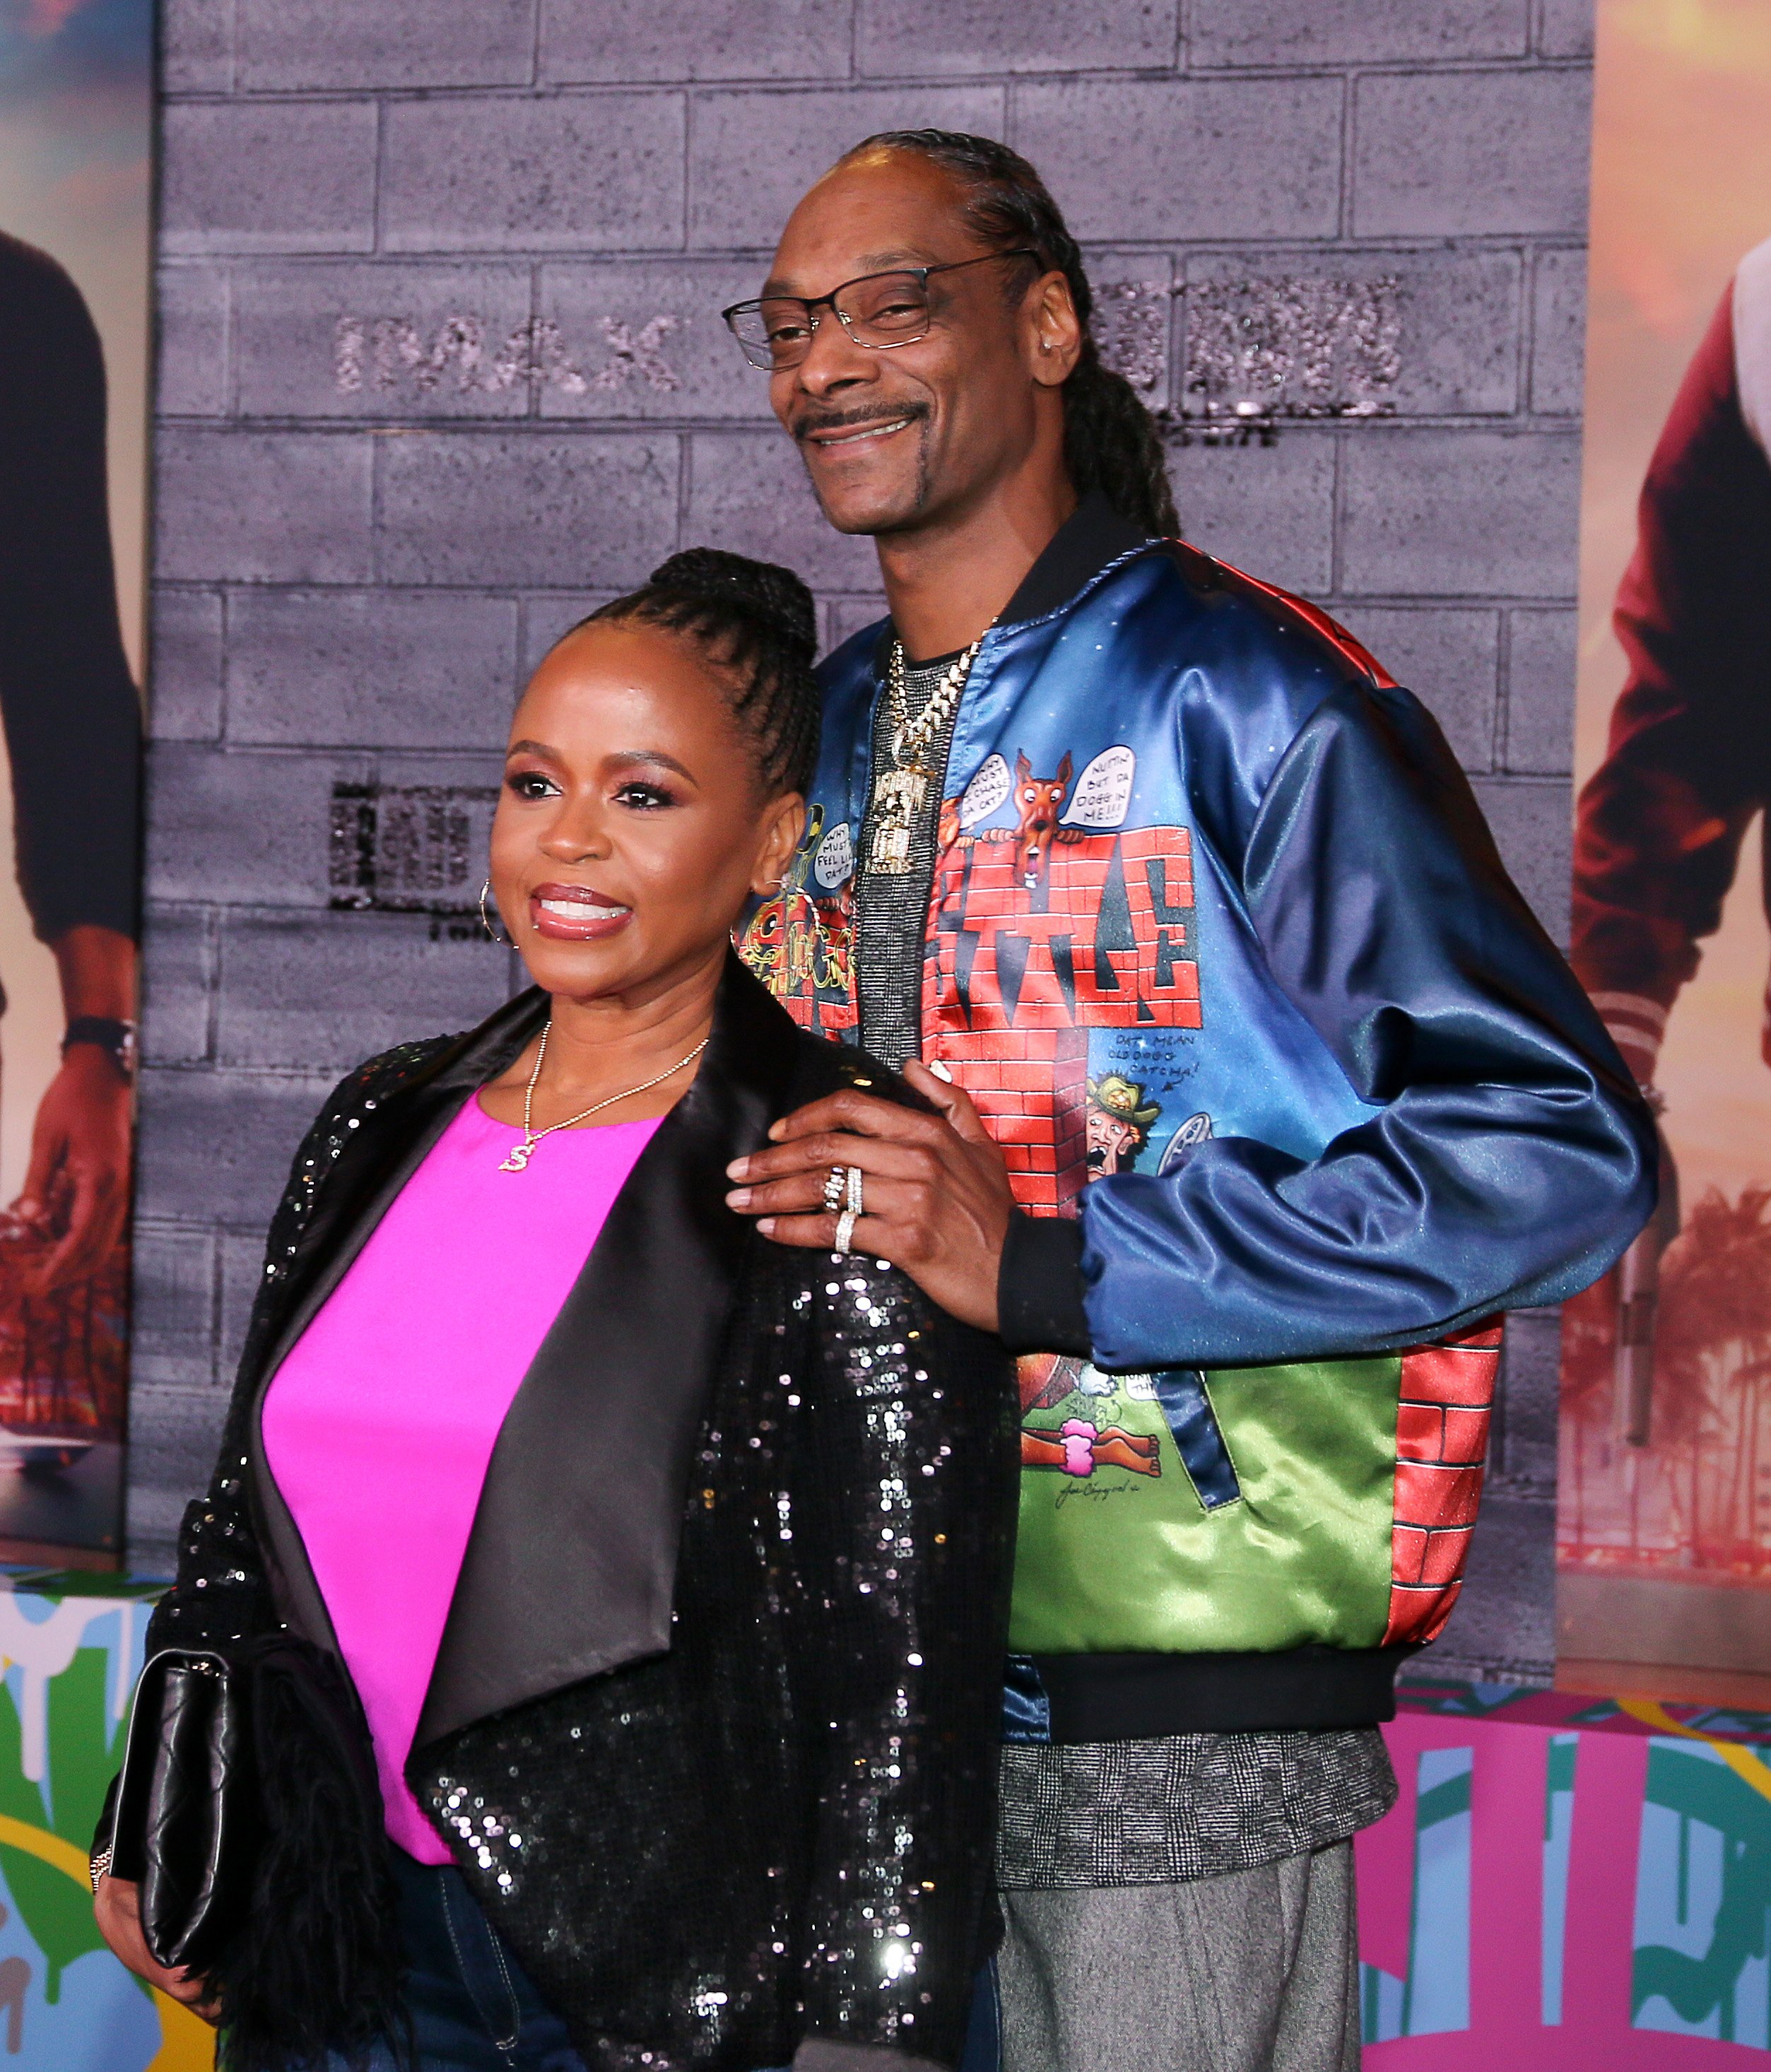 Shante Taylor and Snoop Dogg attend the World Premiere of "Bad Boys for Life" at TCL Chinese Theatre on January 14, 2020 in Hollywood, California | Photo: Getty Images